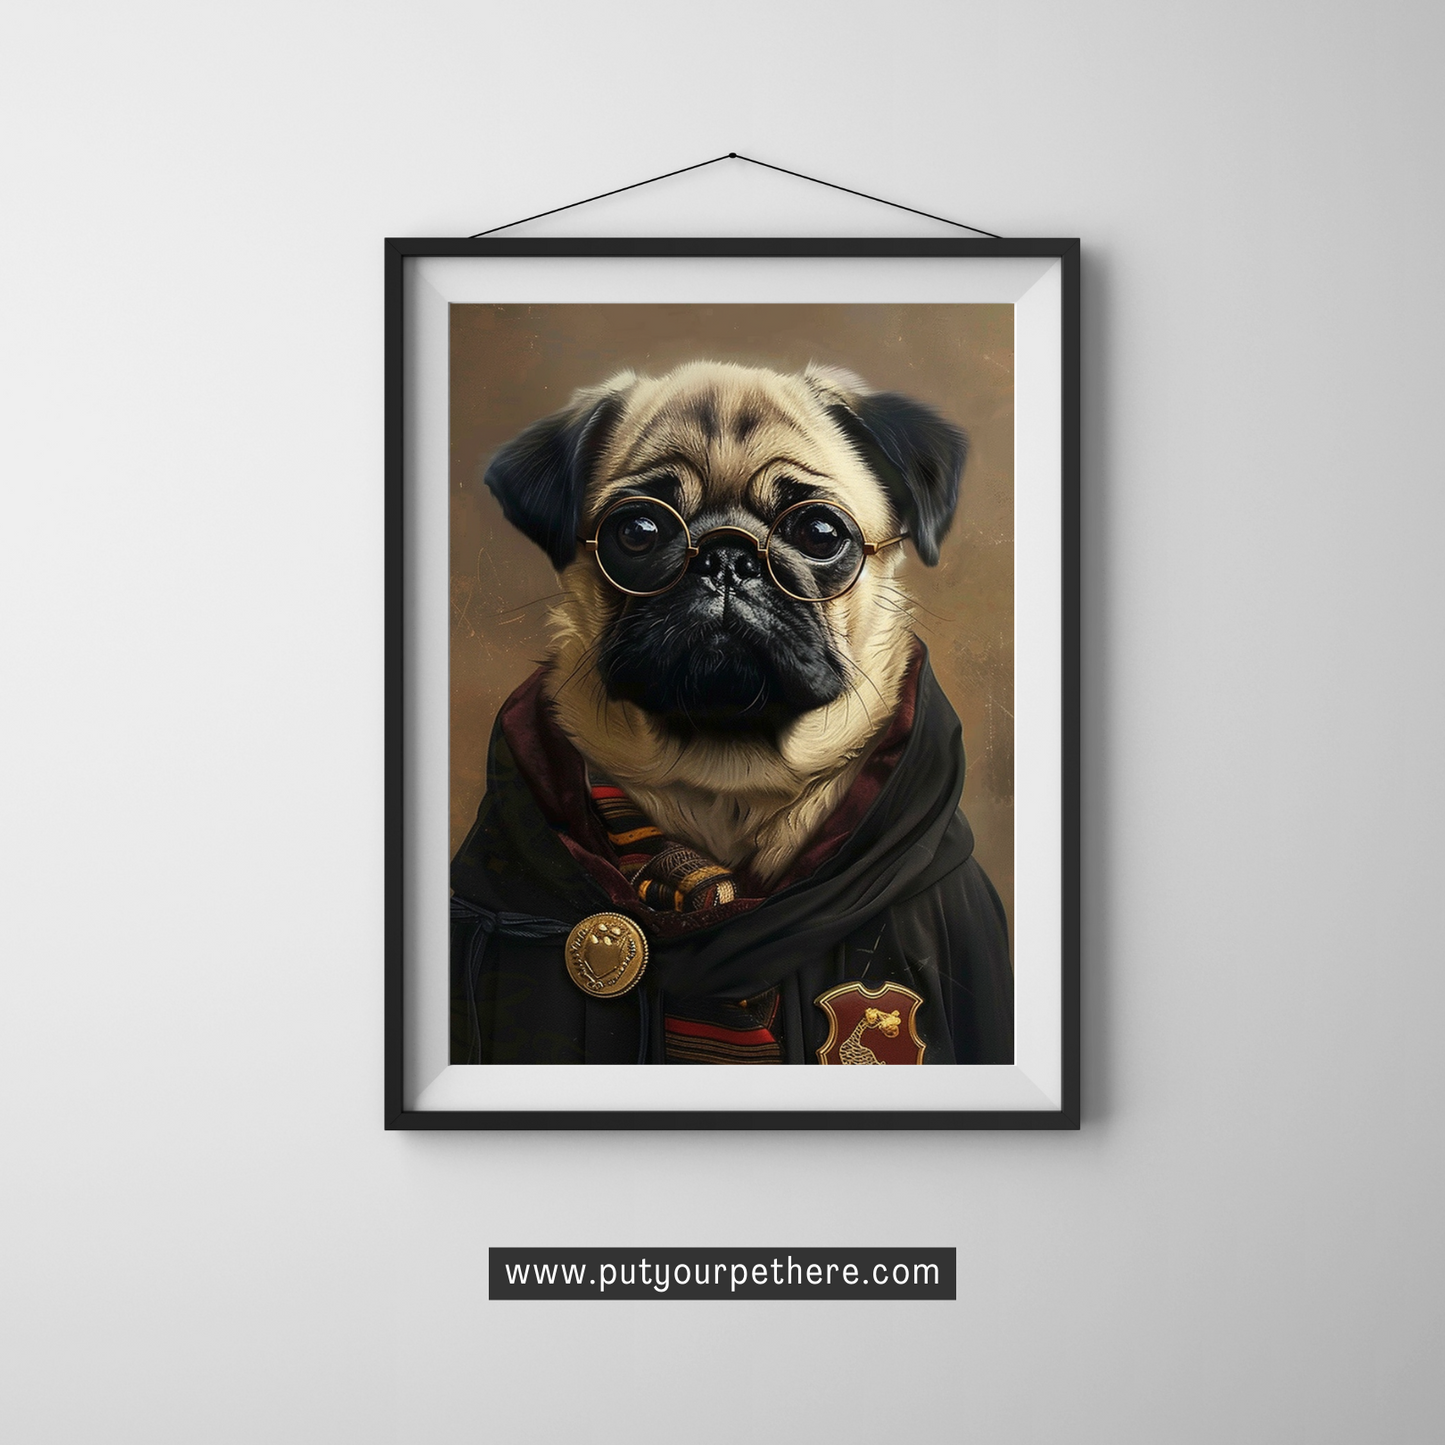 Digital art portrait of a pug as a Harry Potter with a serious expression, adorned in a whimsical scarf and glasses, with a fantasy-style school uniform and a medal of honor, set against a dark, textured backdrop, featured at putyourpethere.com.